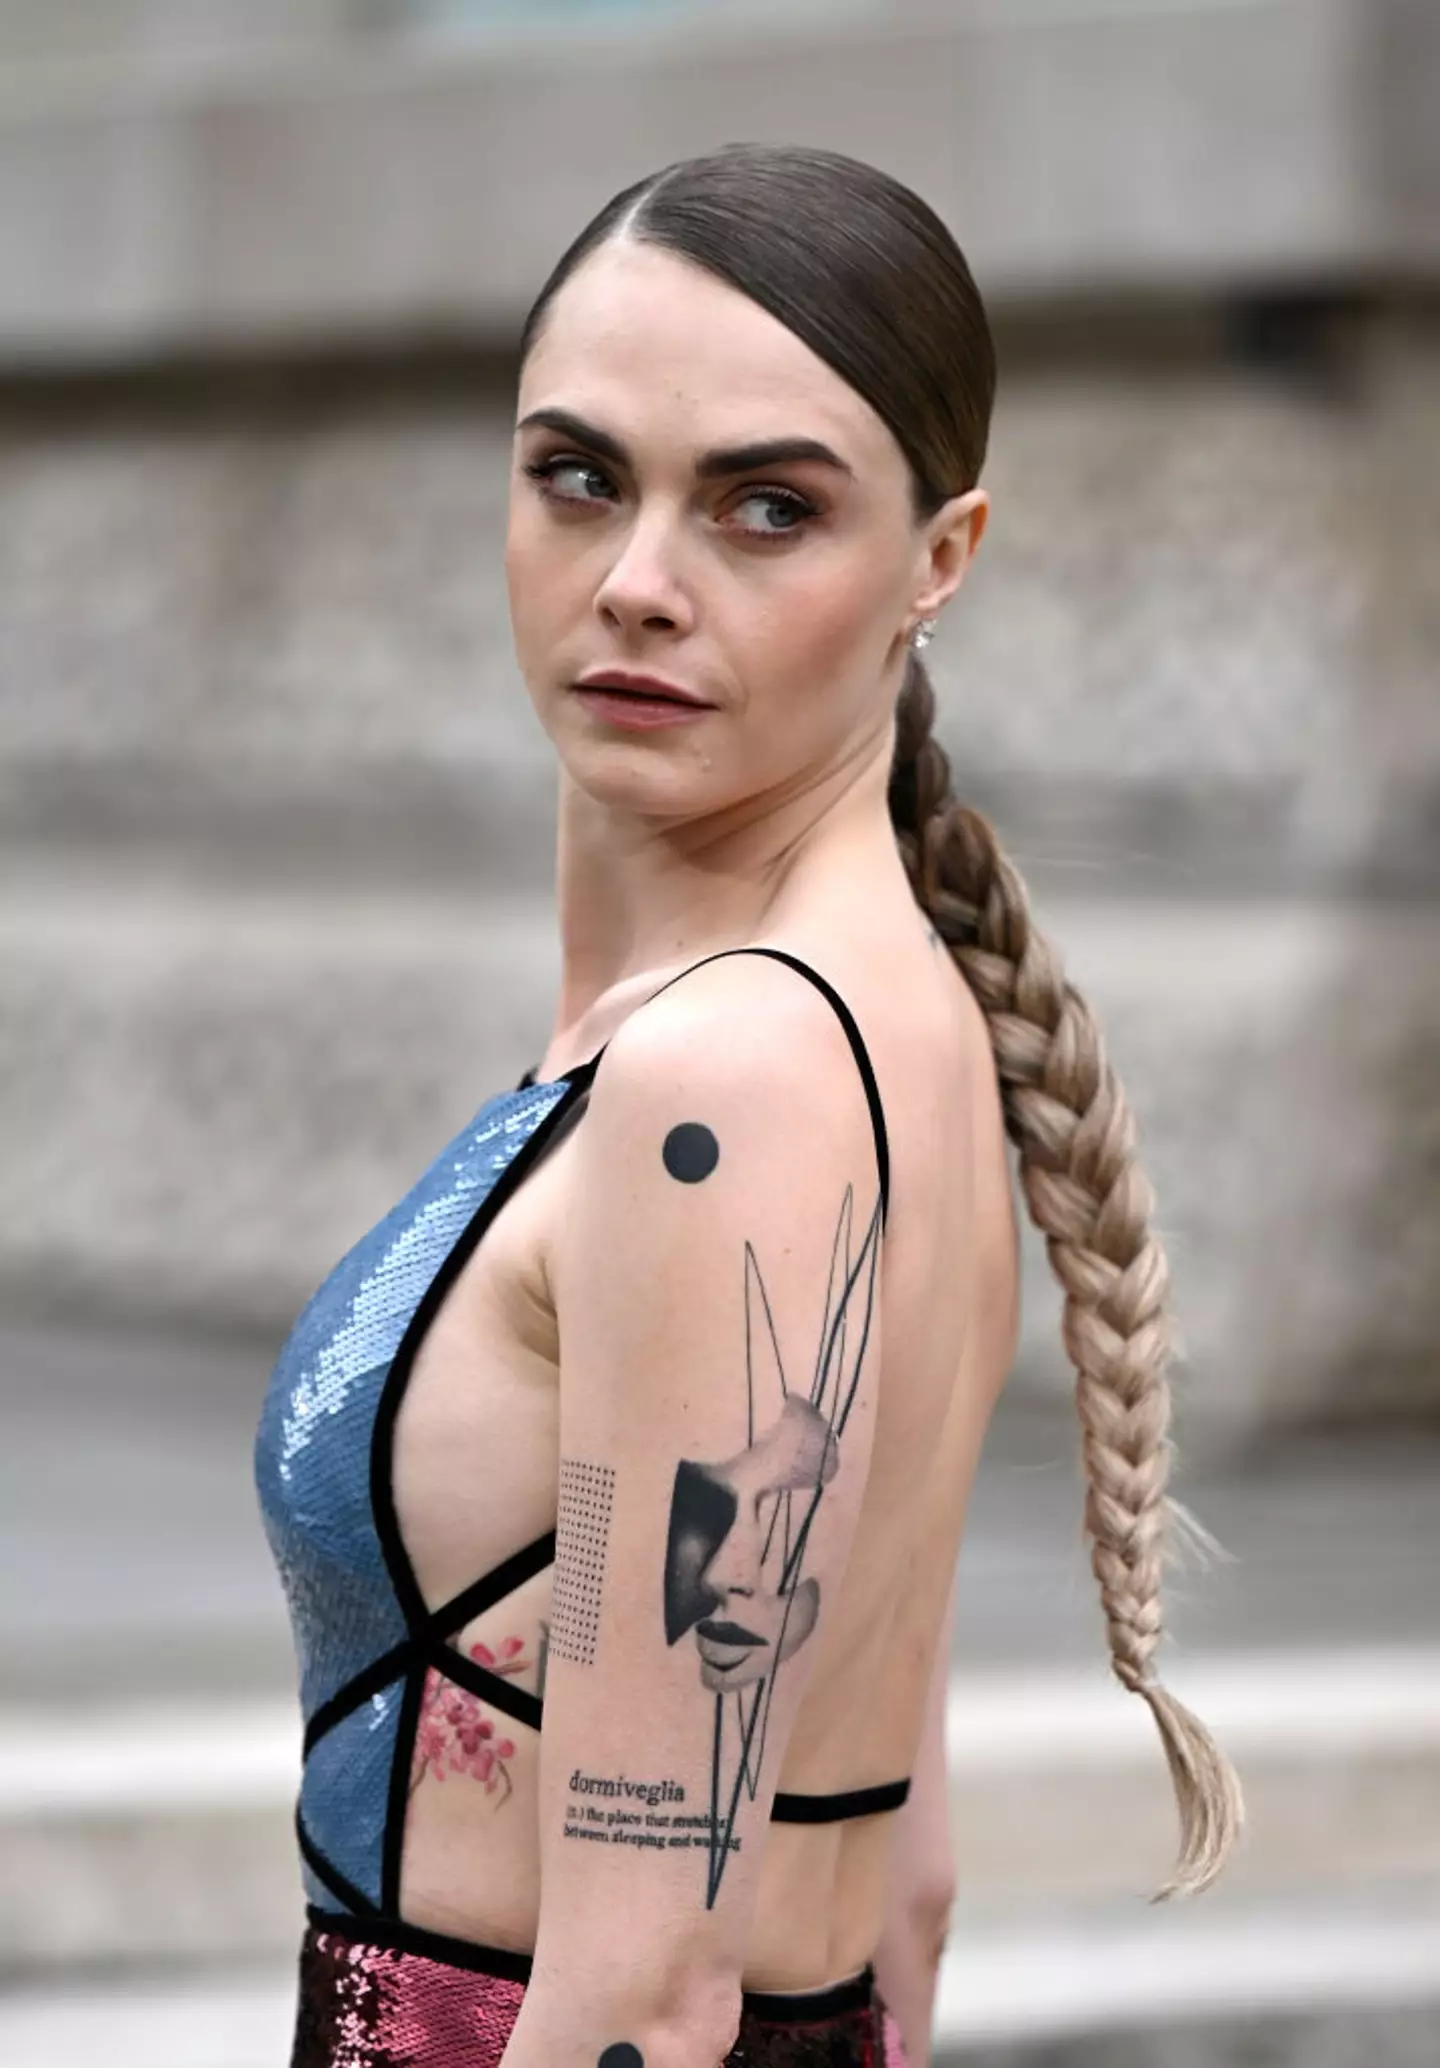 Supermodel and actor Cara Delevingne has refused to take part in the 'tattoo regret' trend. (Gareth Cattermole/Getty Images)